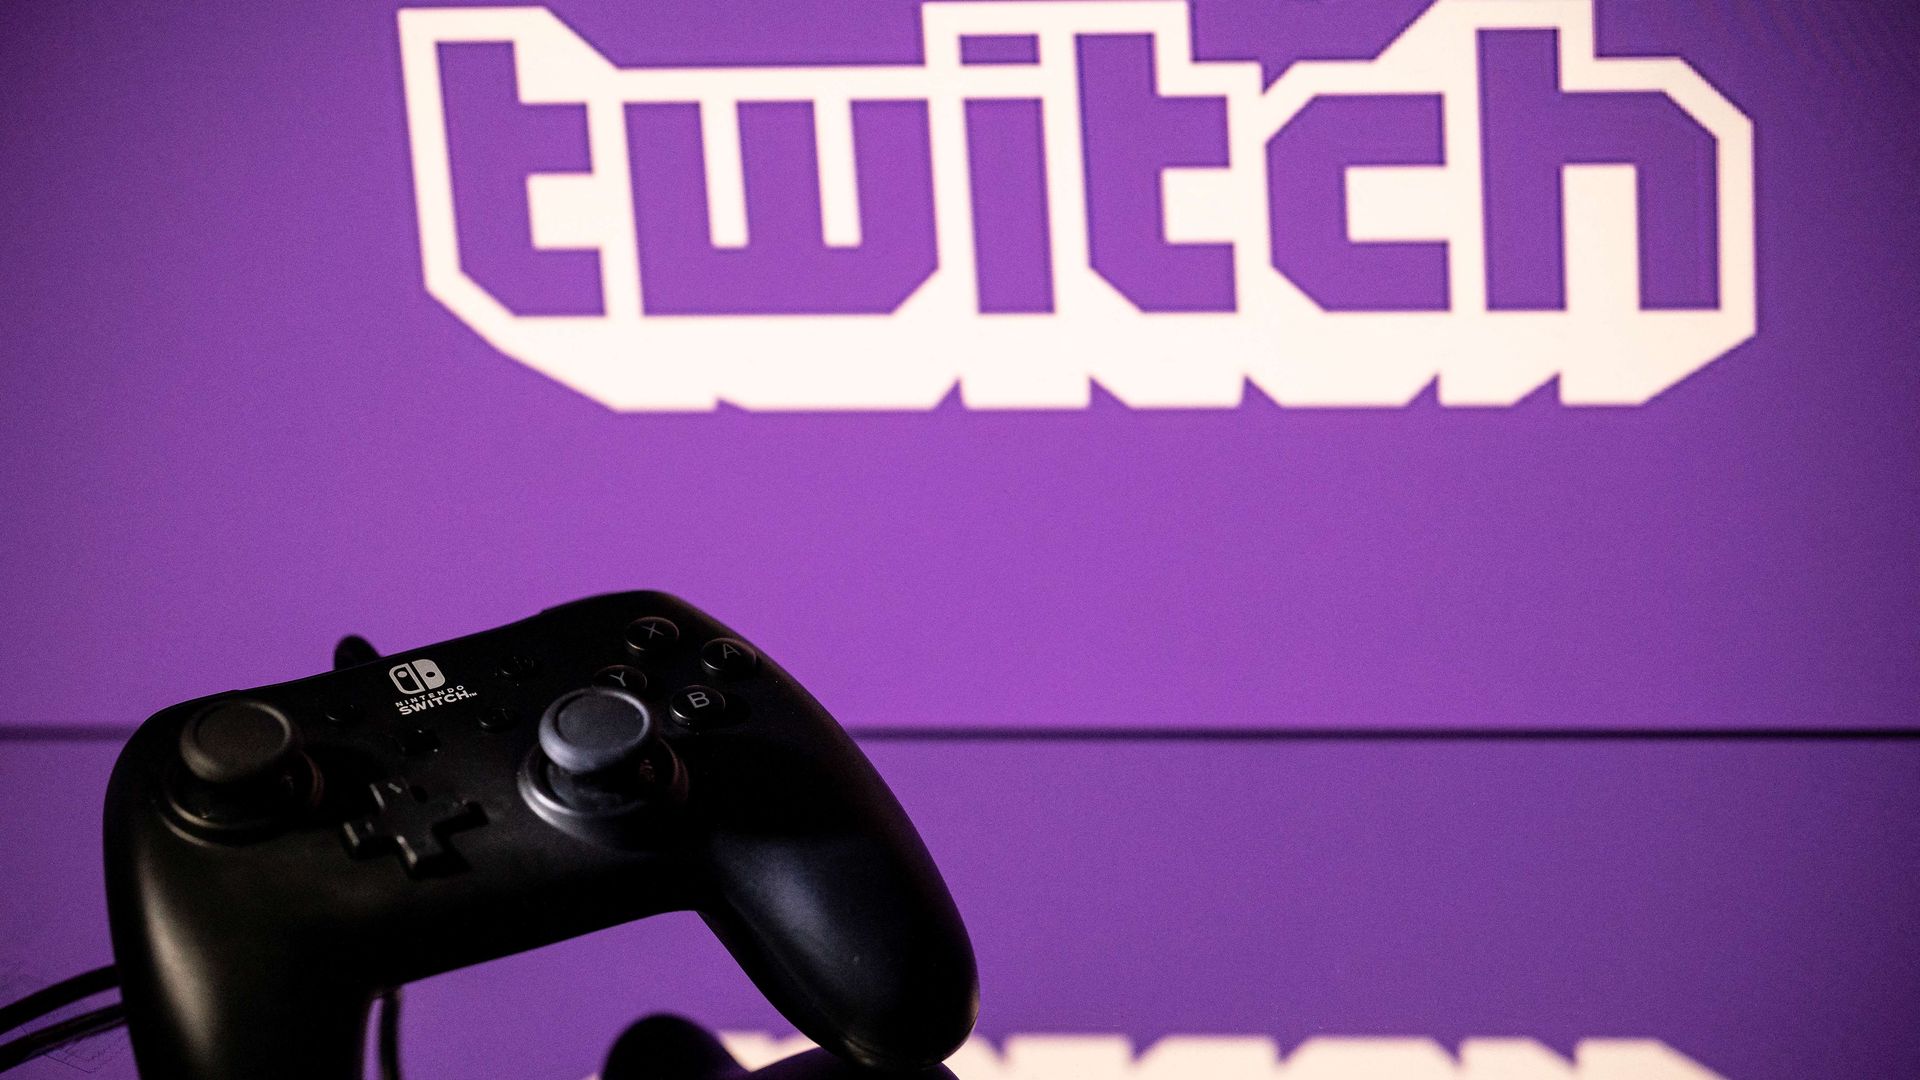 Photo showing a black gaming console set in front of a large screen with the purple Twitch logo